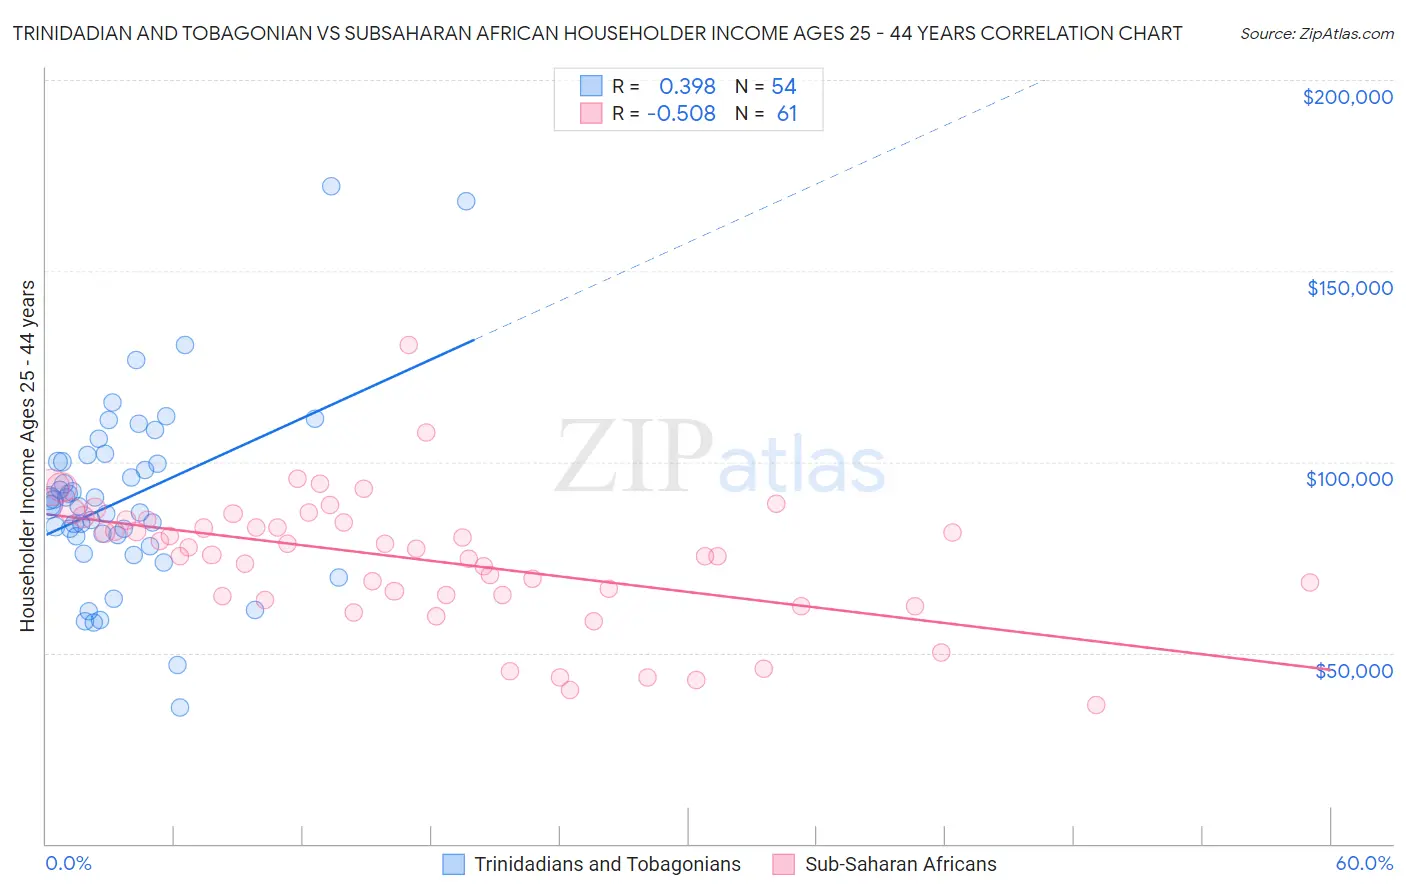 Trinidadian and Tobagonian vs Subsaharan African Householder Income Ages 25 - 44 years